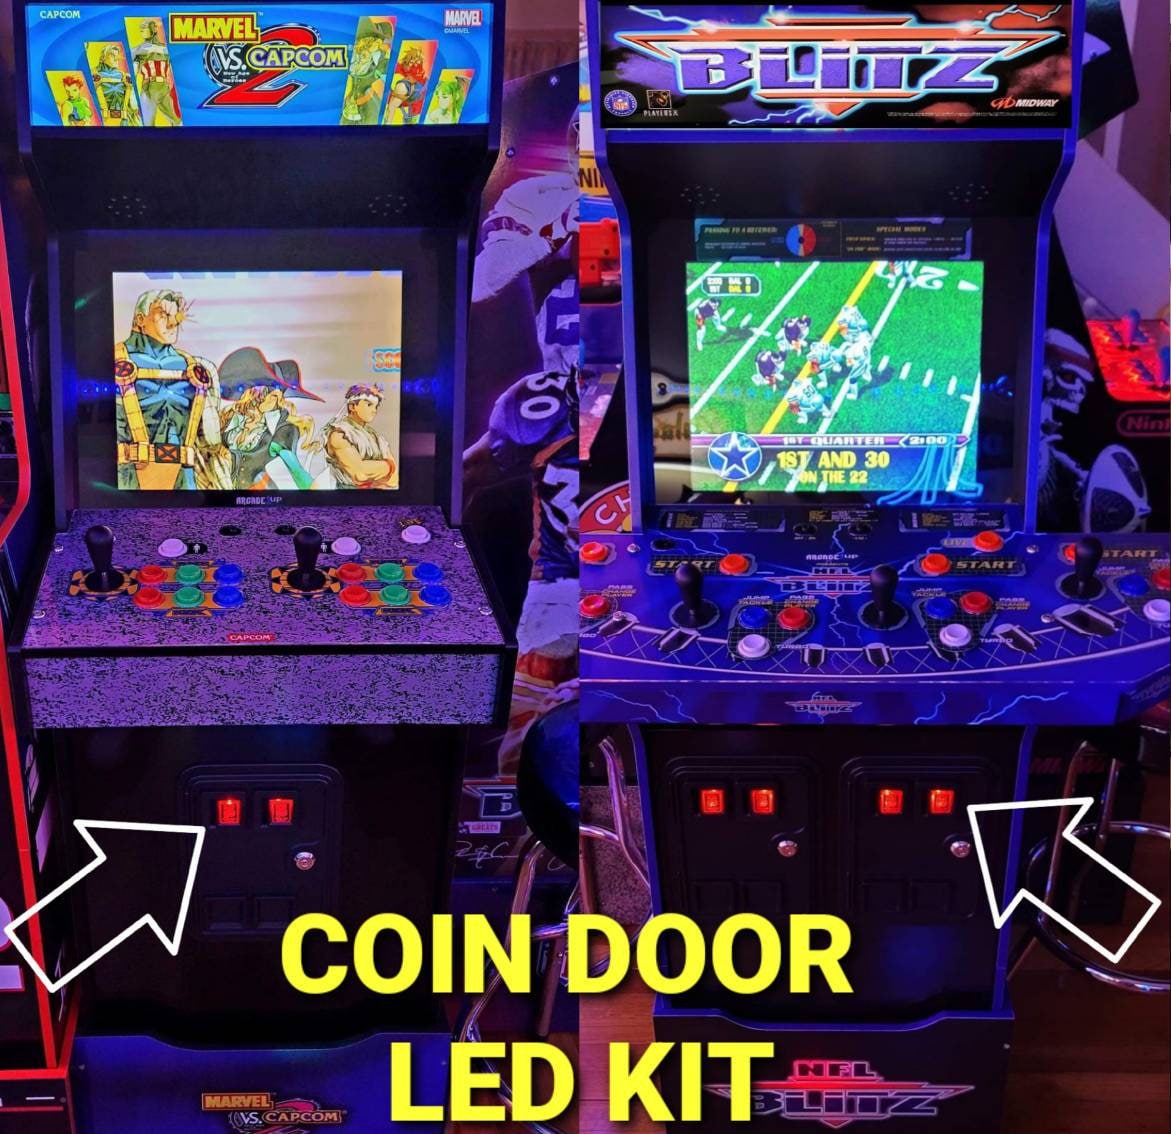 Arcade1Up - Fall Guys Complete Art Kit